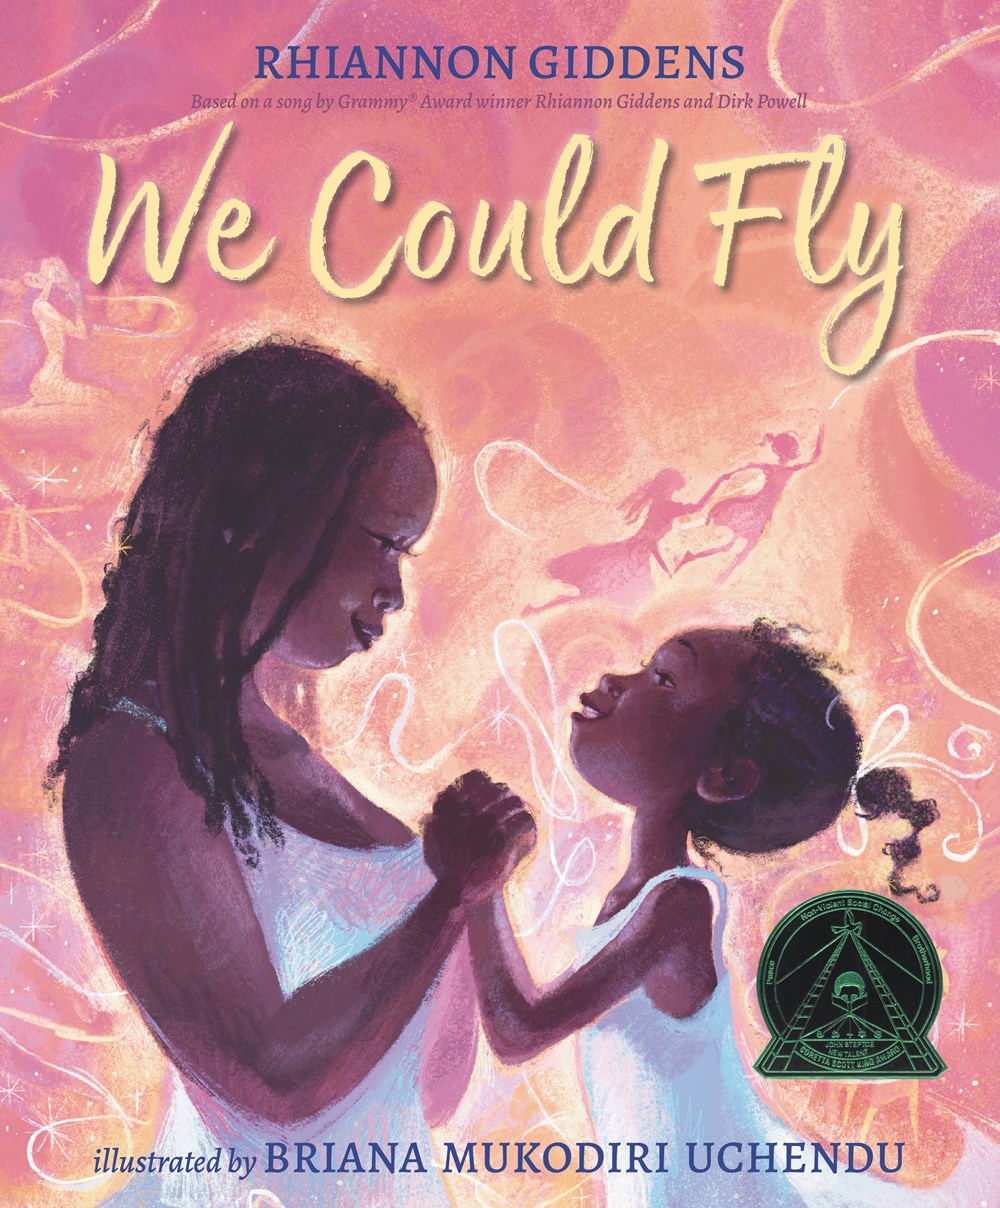 Cover of We Could Fly by Rhiannon Giddens, illustrated by Briana Mukodiri Uchendu